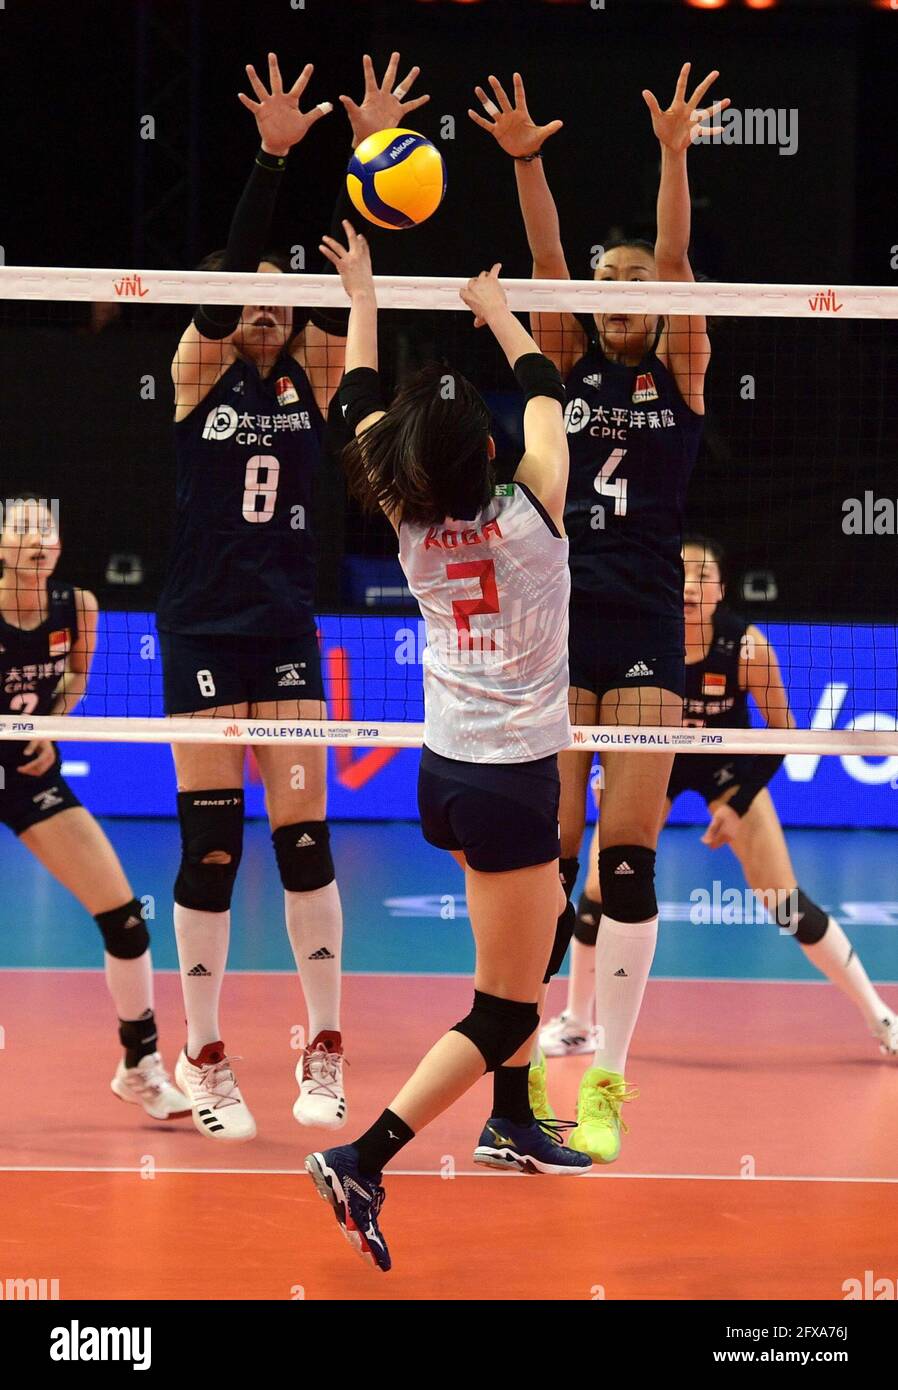 Rimini. 26th May, 2021. Koga Sarina (front) of Japan blocks during the Preliminary Round match between Japan and China at the 2021 FIVB Volleyball Nations League in Rimini, Italy, on May 26, 2021. Credit: Xinhua/Alamy Live News Stock Photo